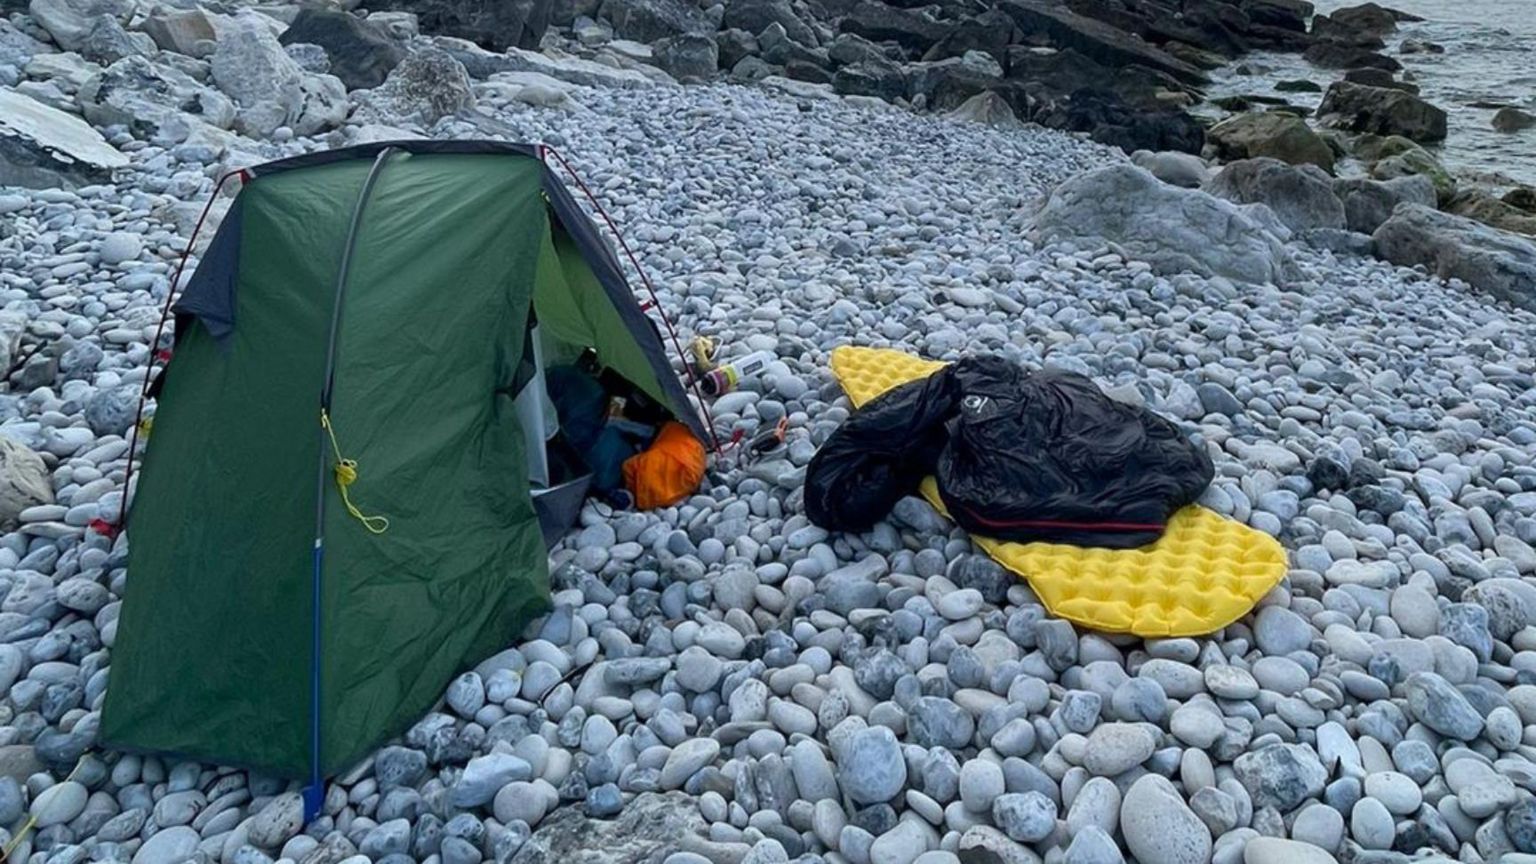 A green tent next to a yellow roll-up camping bed mat laid out on grey pebbles on a beach